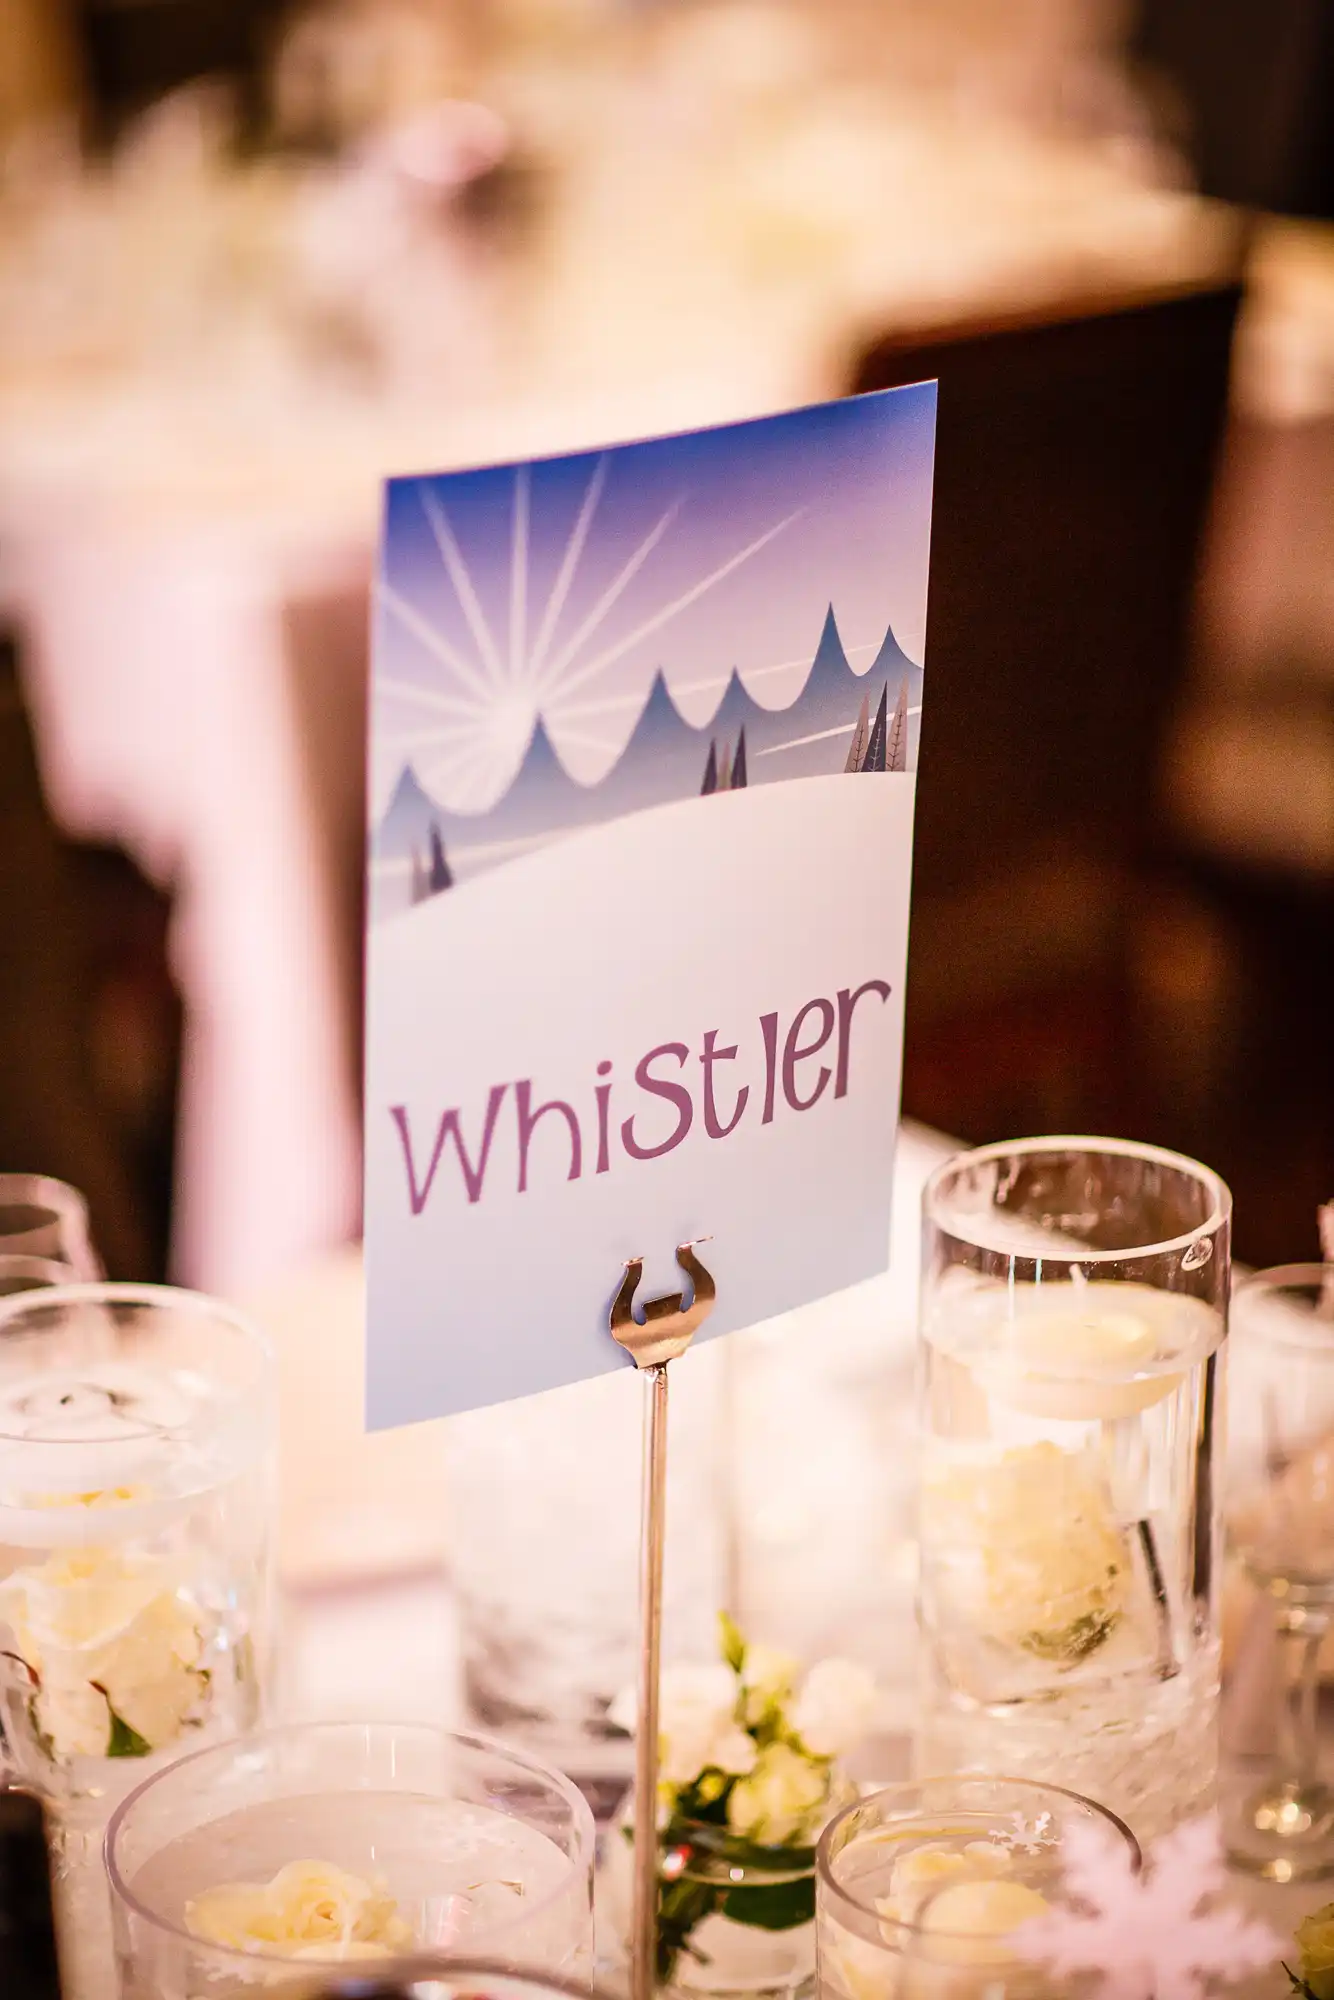 Table sign reading "whistler" with an illustrated mountain backdrop, placed among glasses and floral decorations at an elegant event.